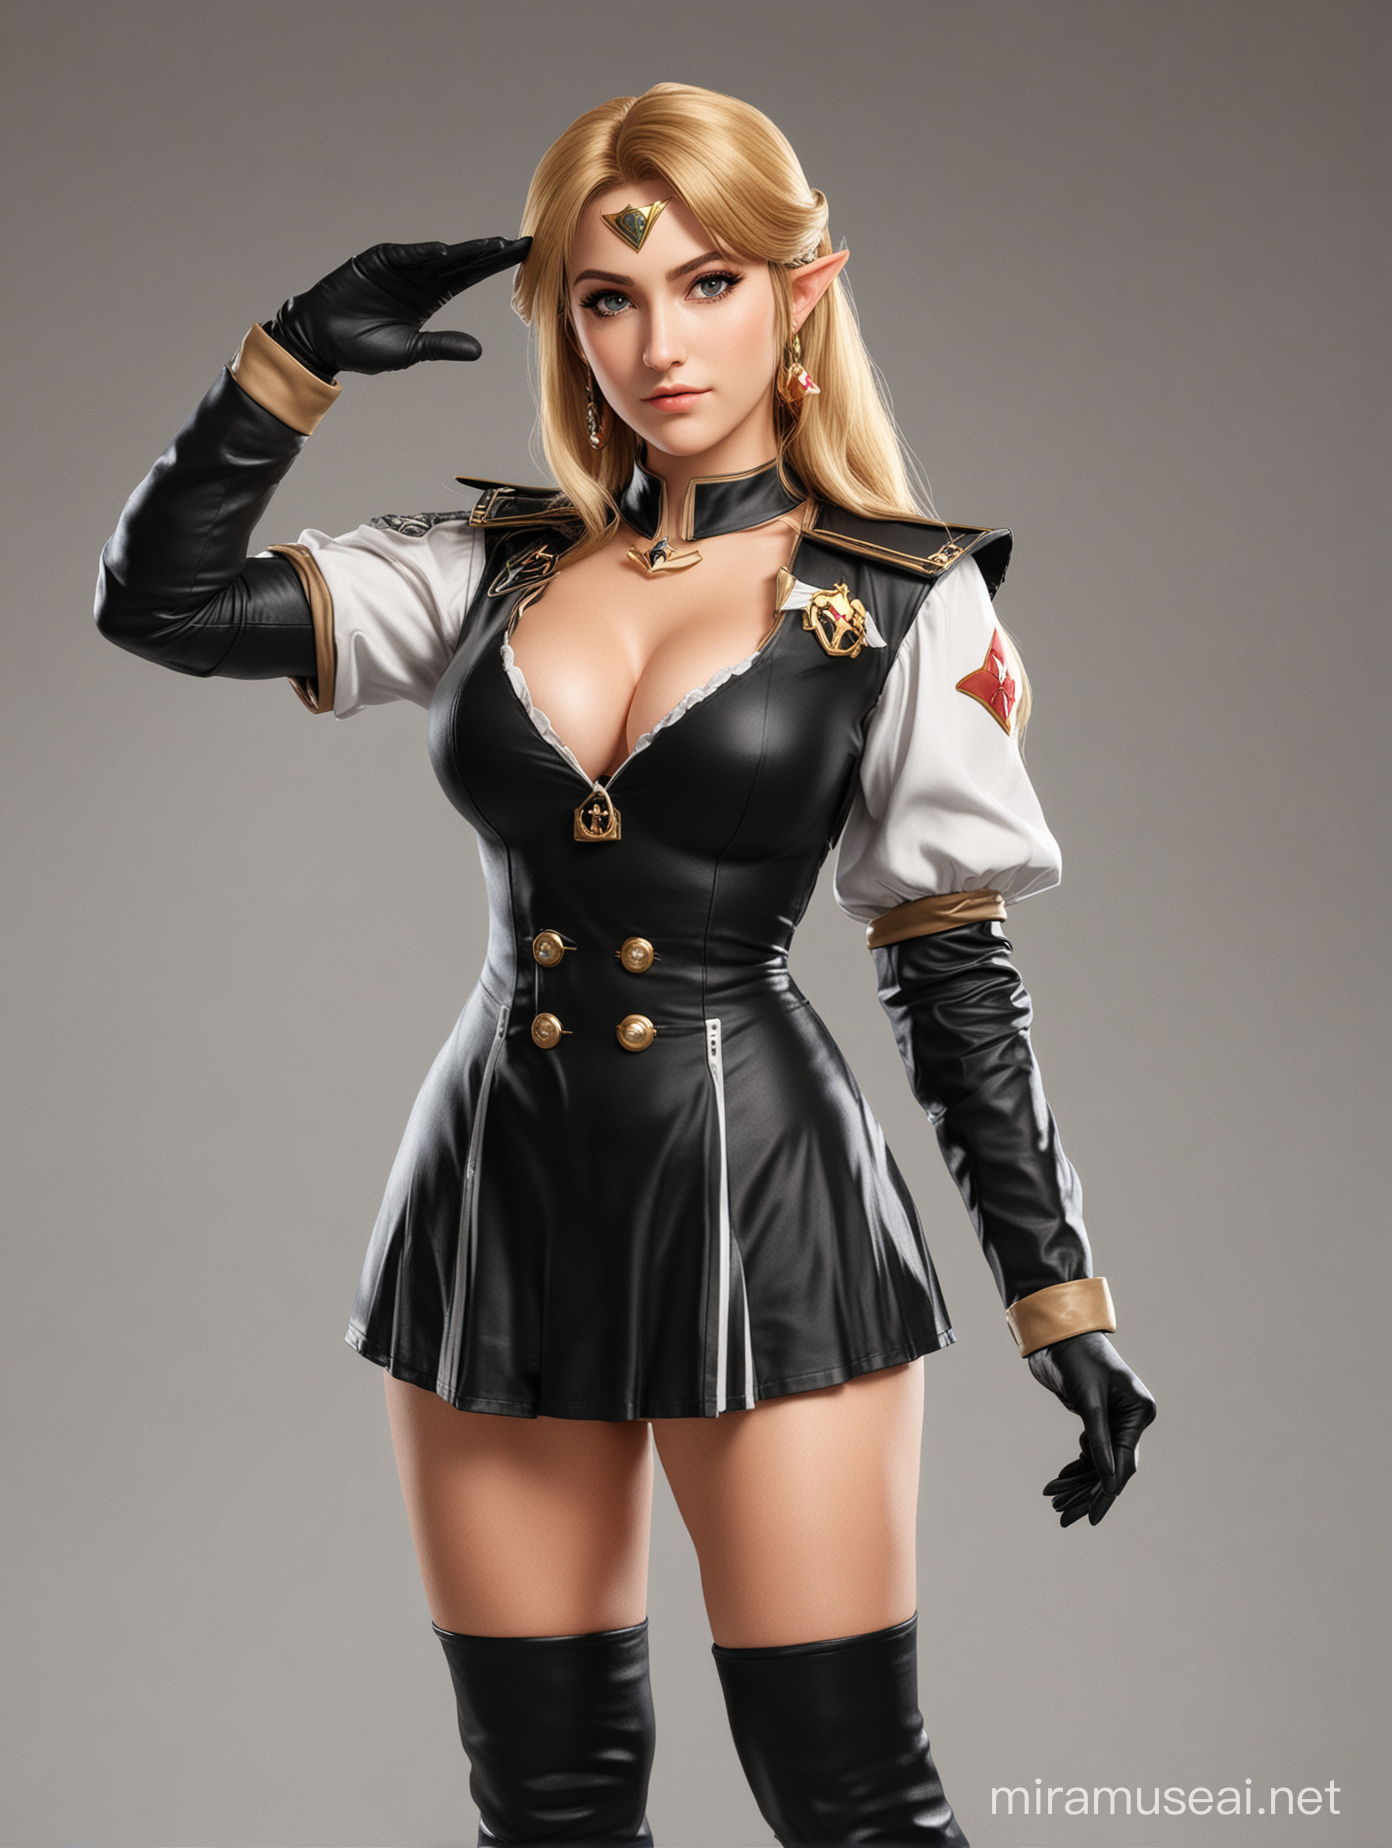 princess zelda from super smash bros melee in a black german SS uniform with huge breasts and cleavage doing a one arm salute on a blank background